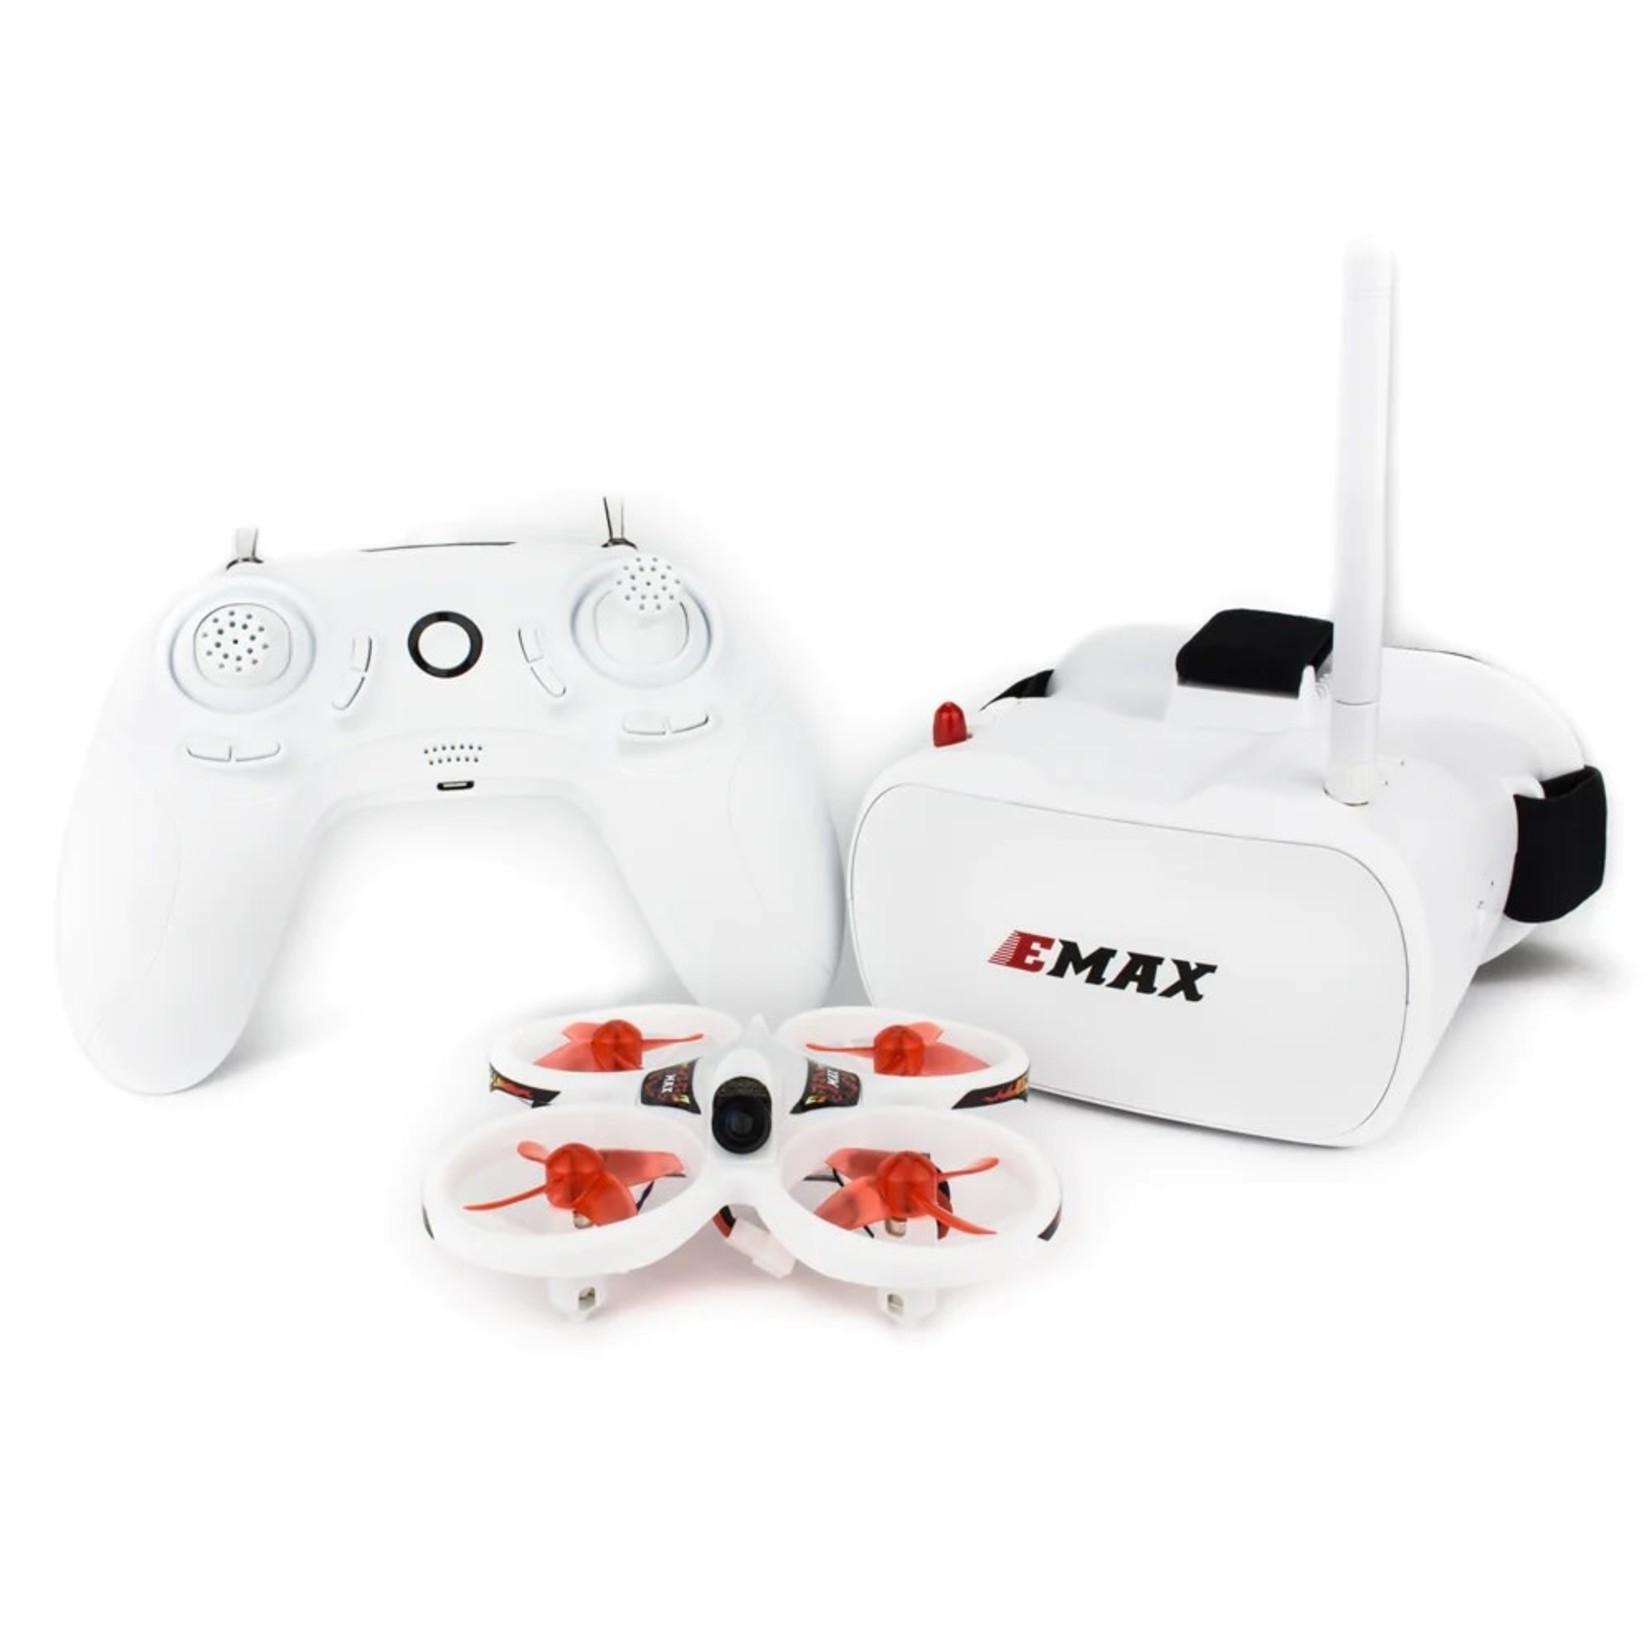 EMAX EMAX USA EZ Pilot Beginner Indoor Racing Drone - With Controller & Goggle RTF #0110001095